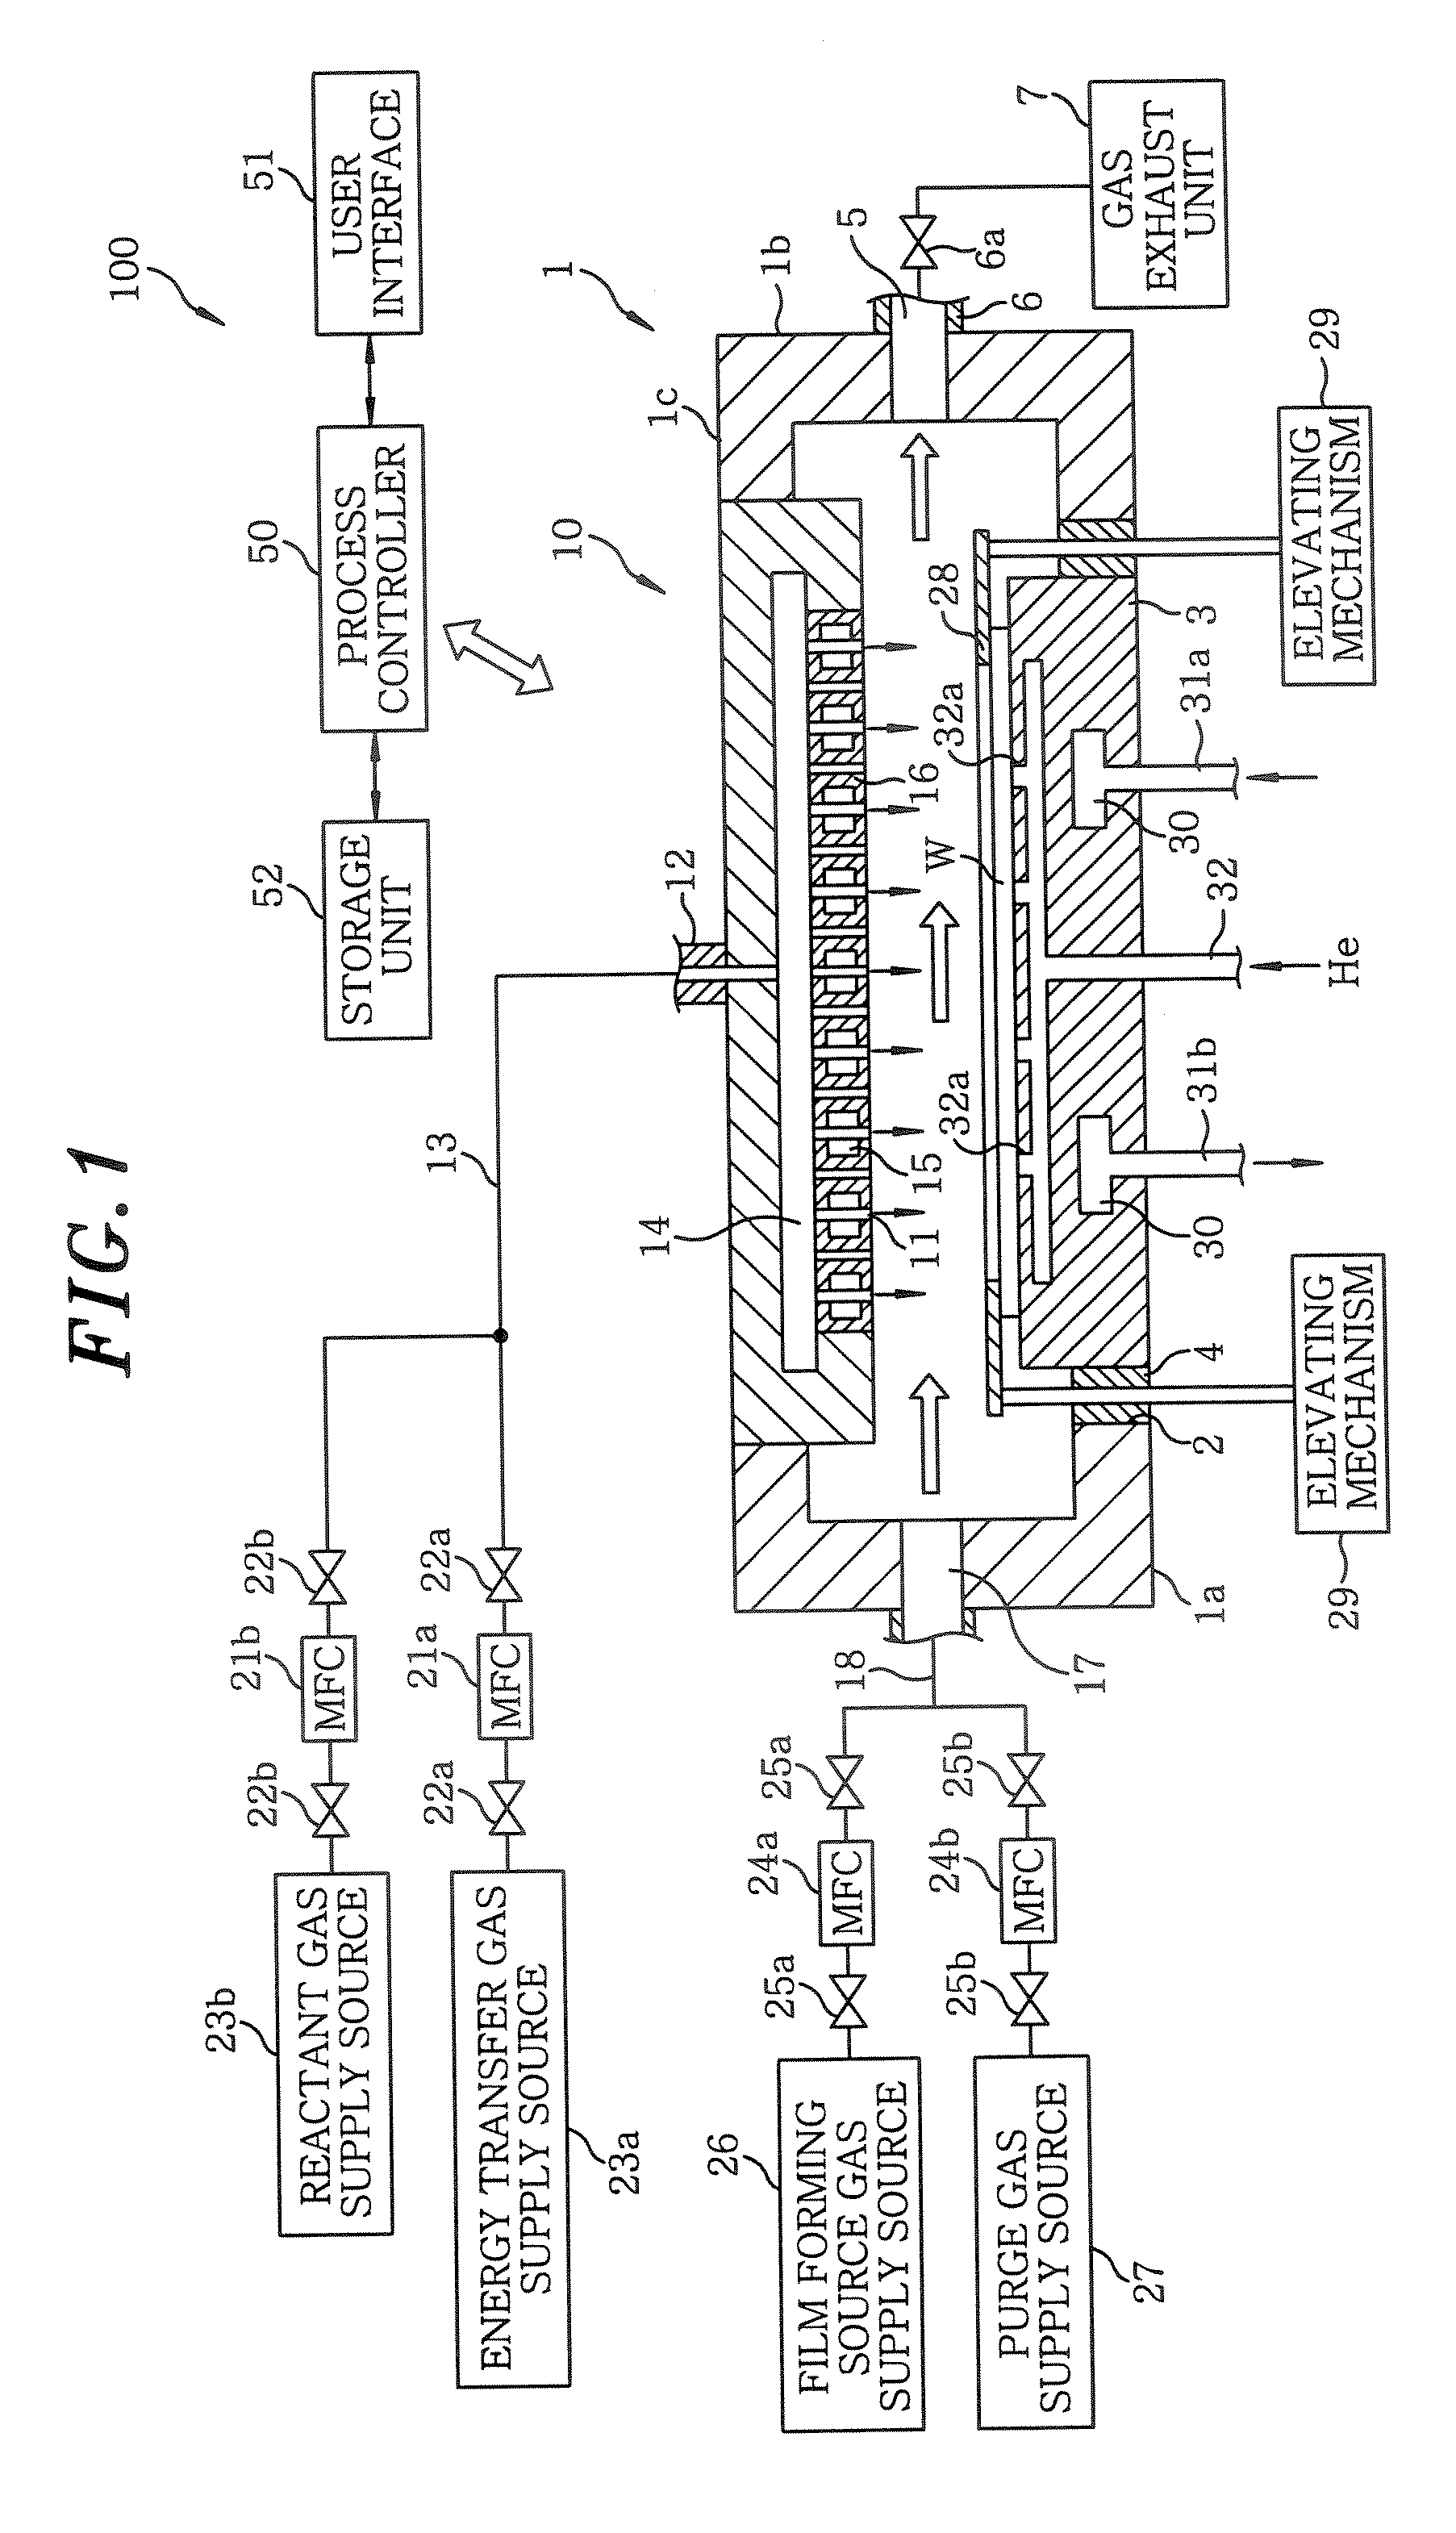 Film forming method and apparatus